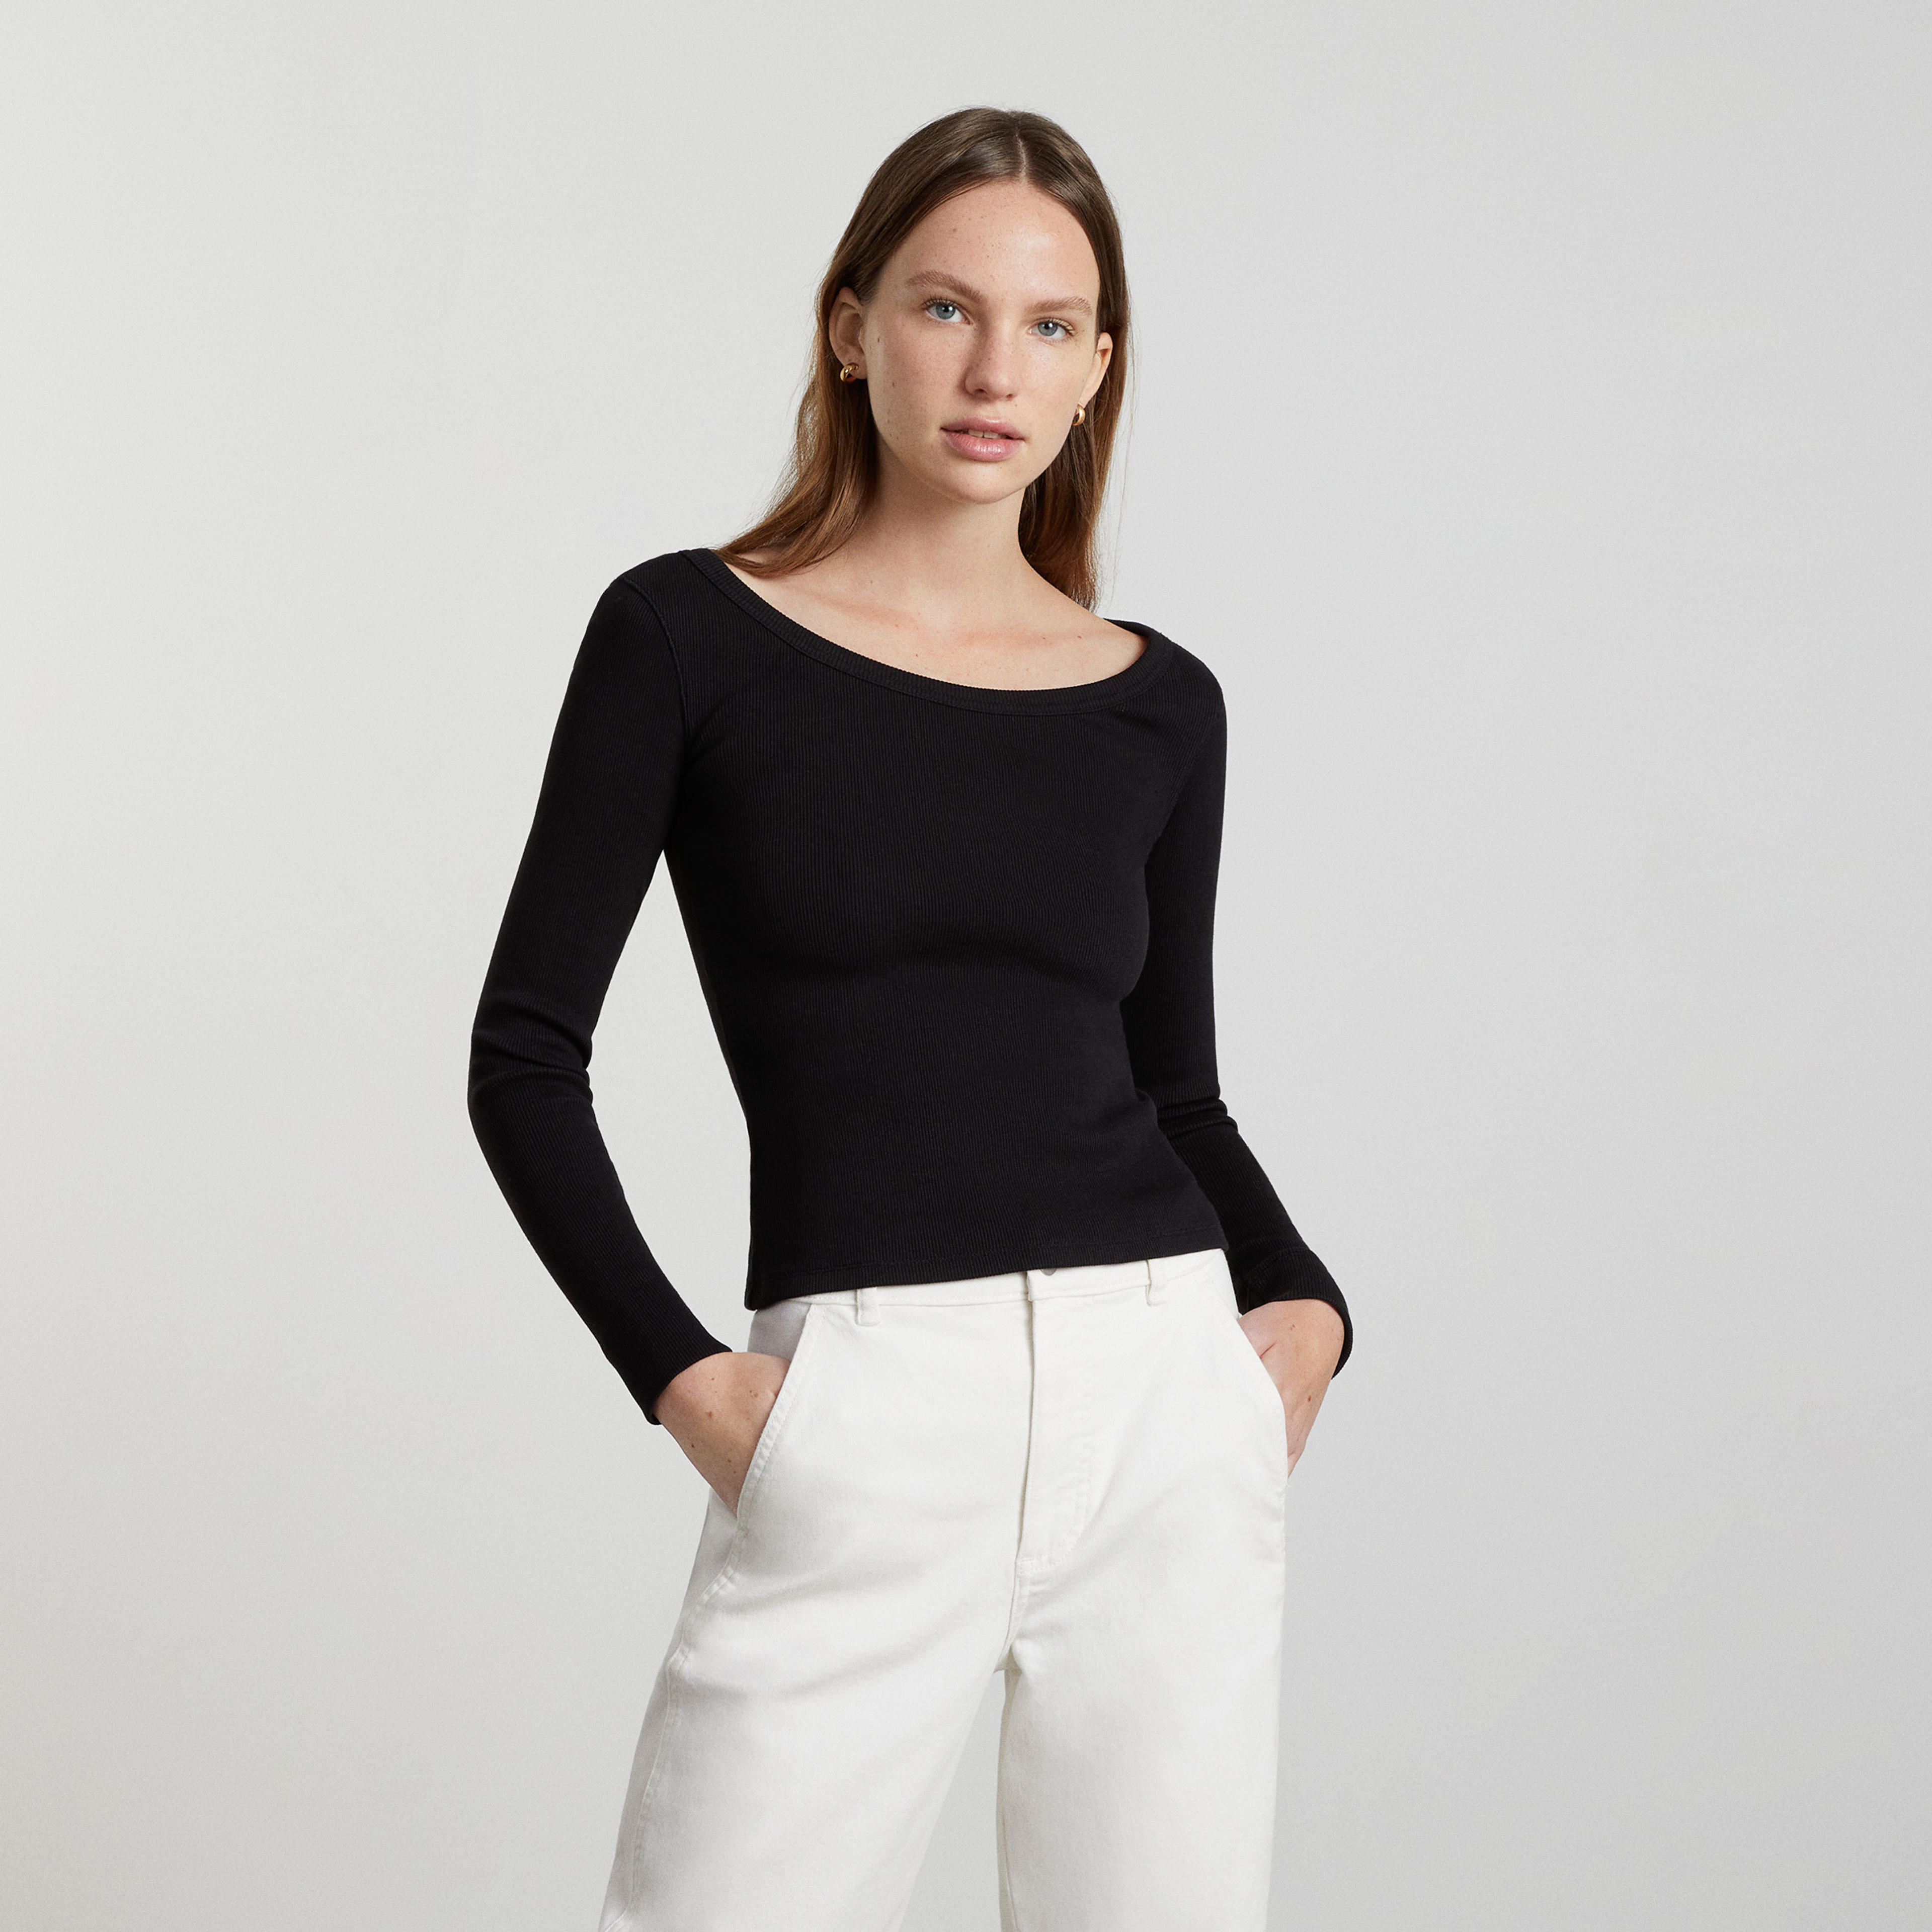 The Long-Sleeve Ribbed Scoop-Neck Tee